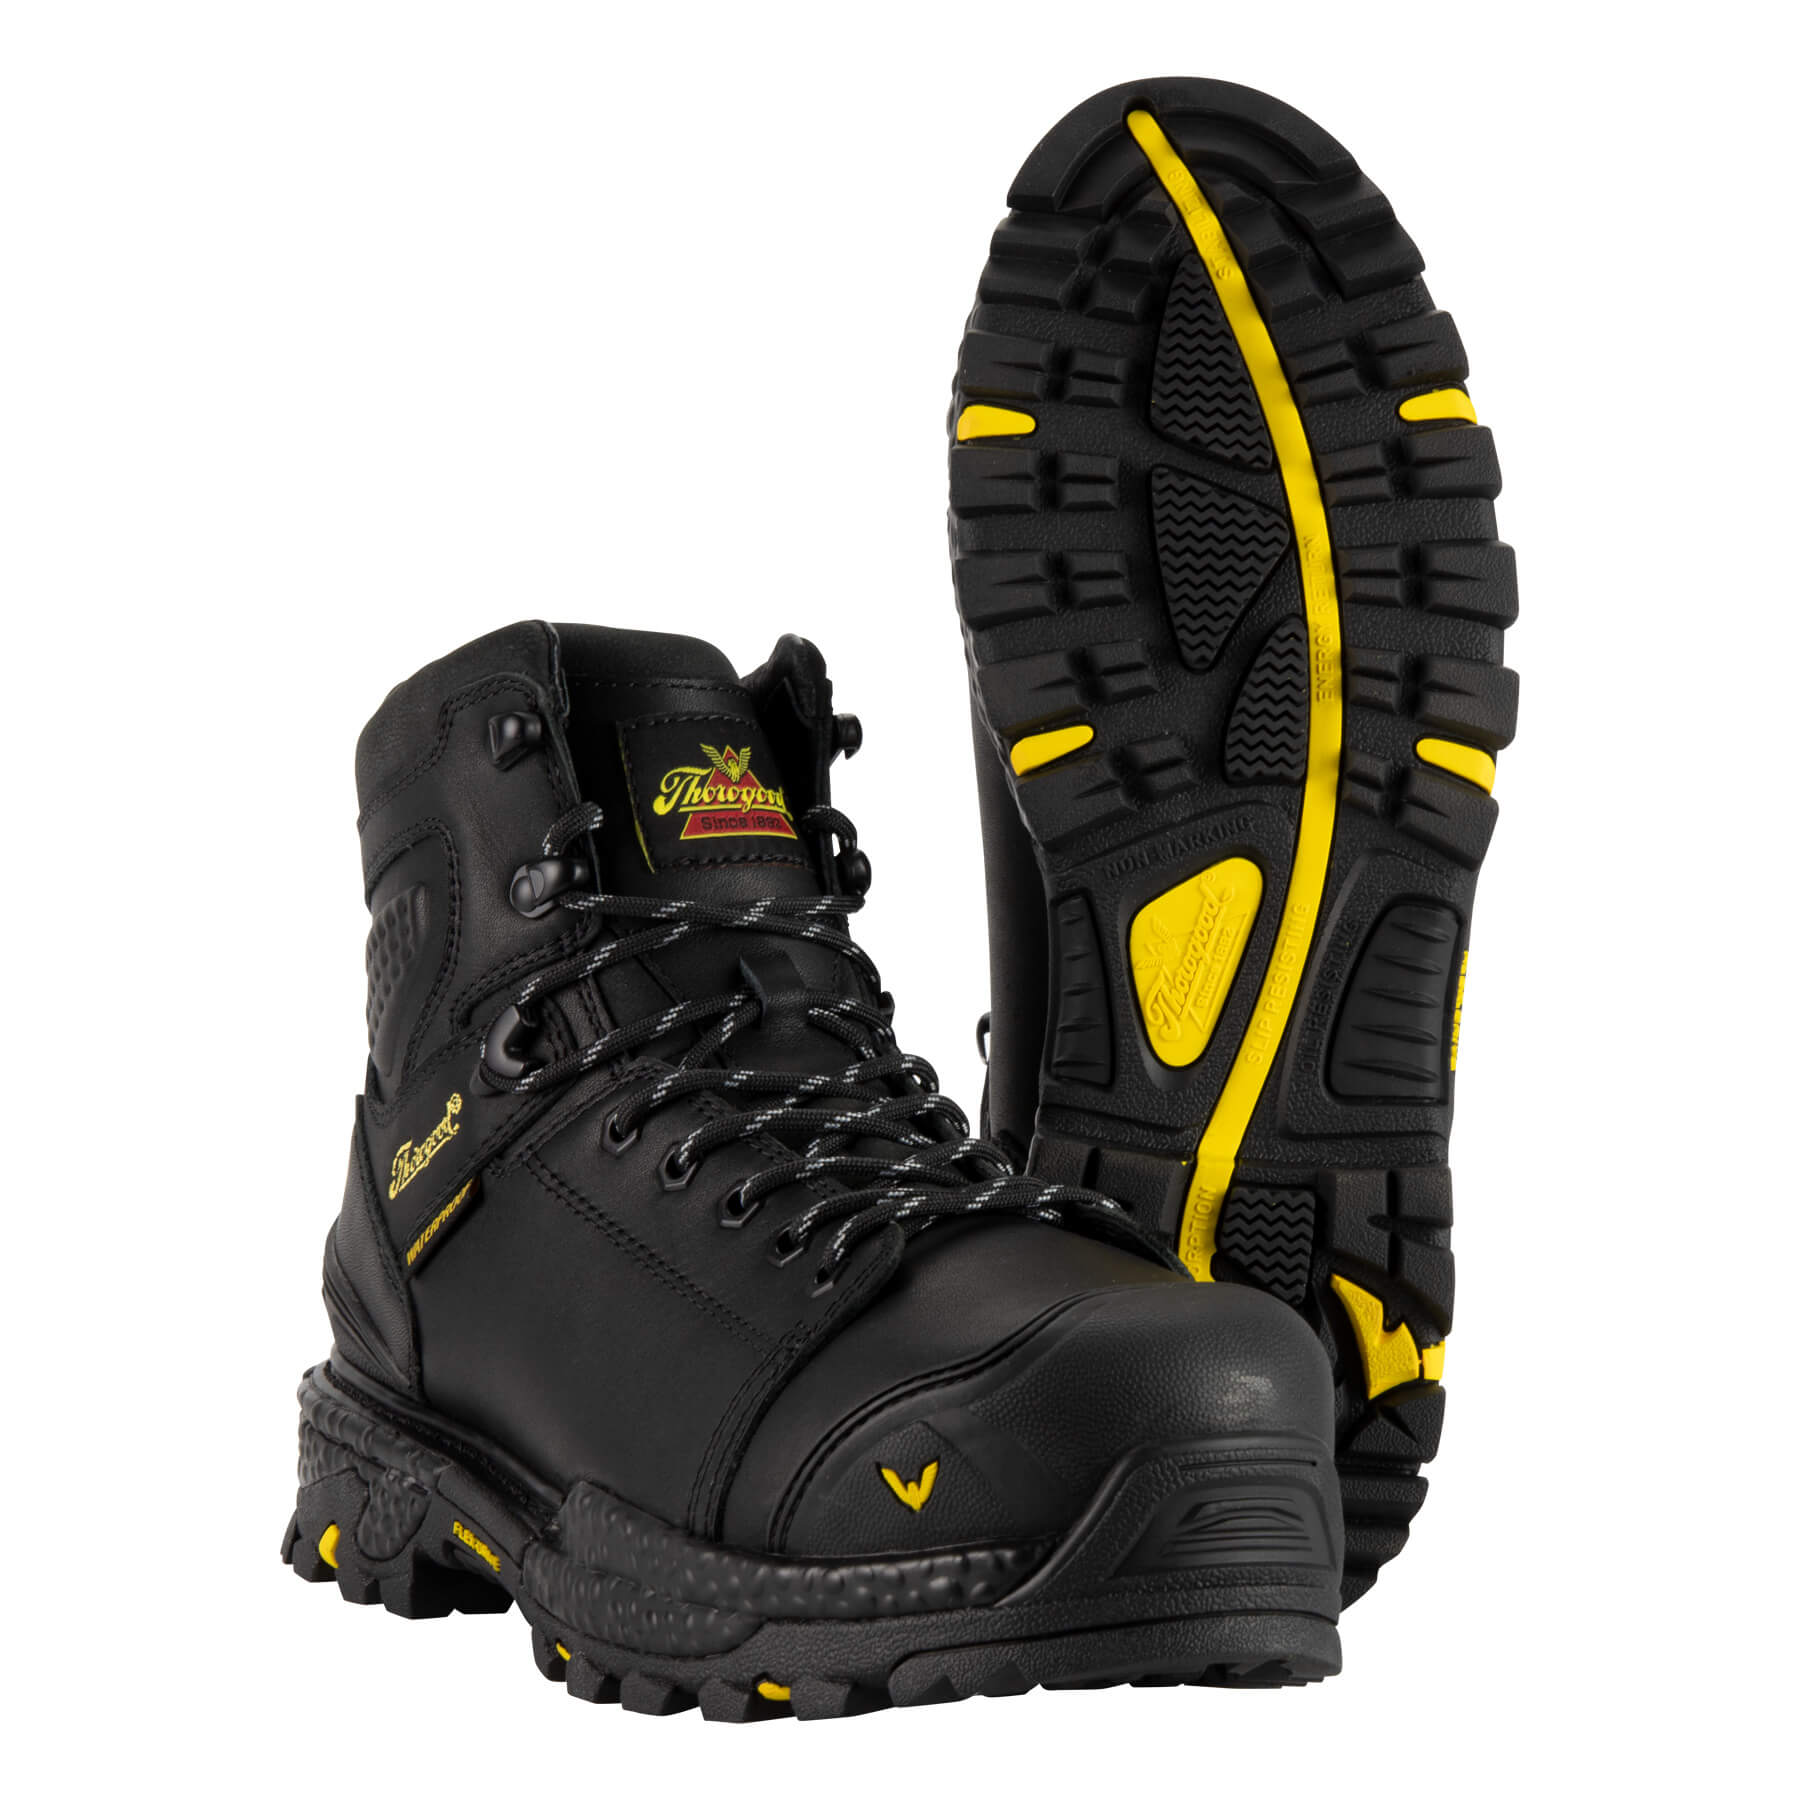 Thorogood Infinity FD Series 6 Inch Black Waterproof Safety Toe Boots from Columbia Safety